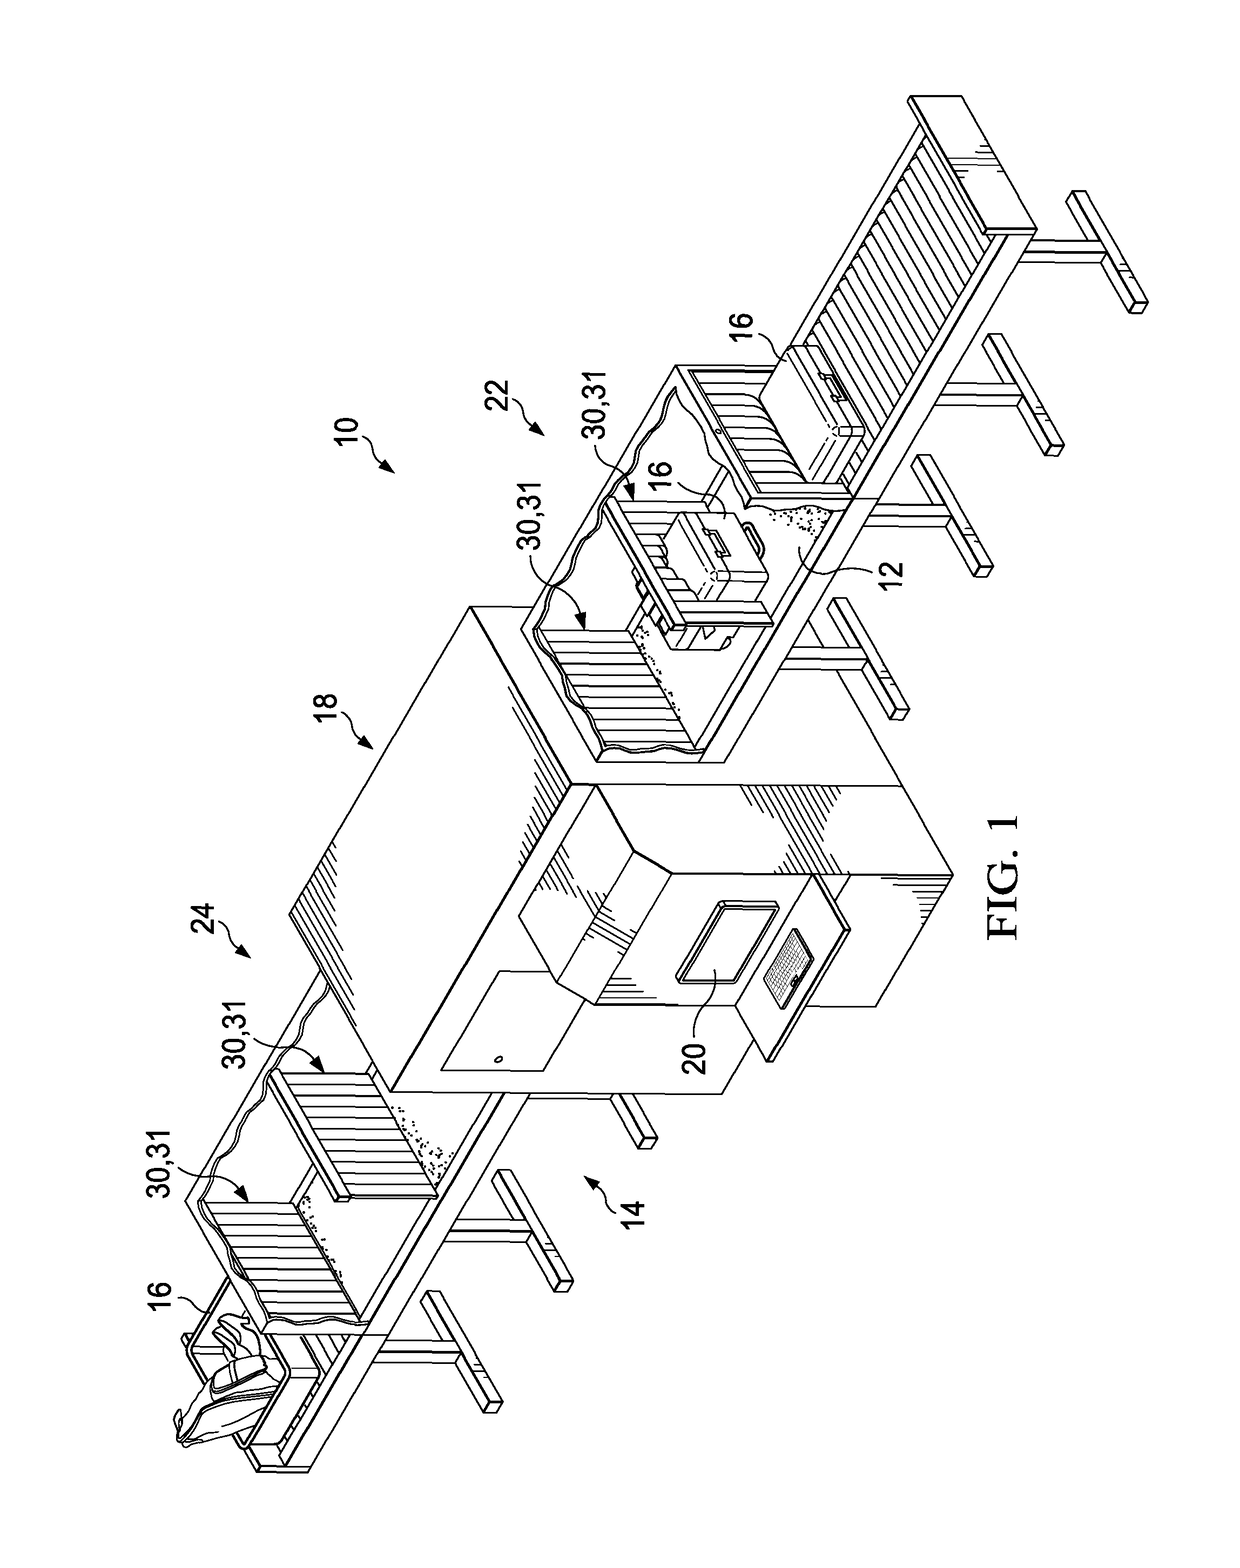 Shielding curtain assembly for an electromagnetic radiation scanning system